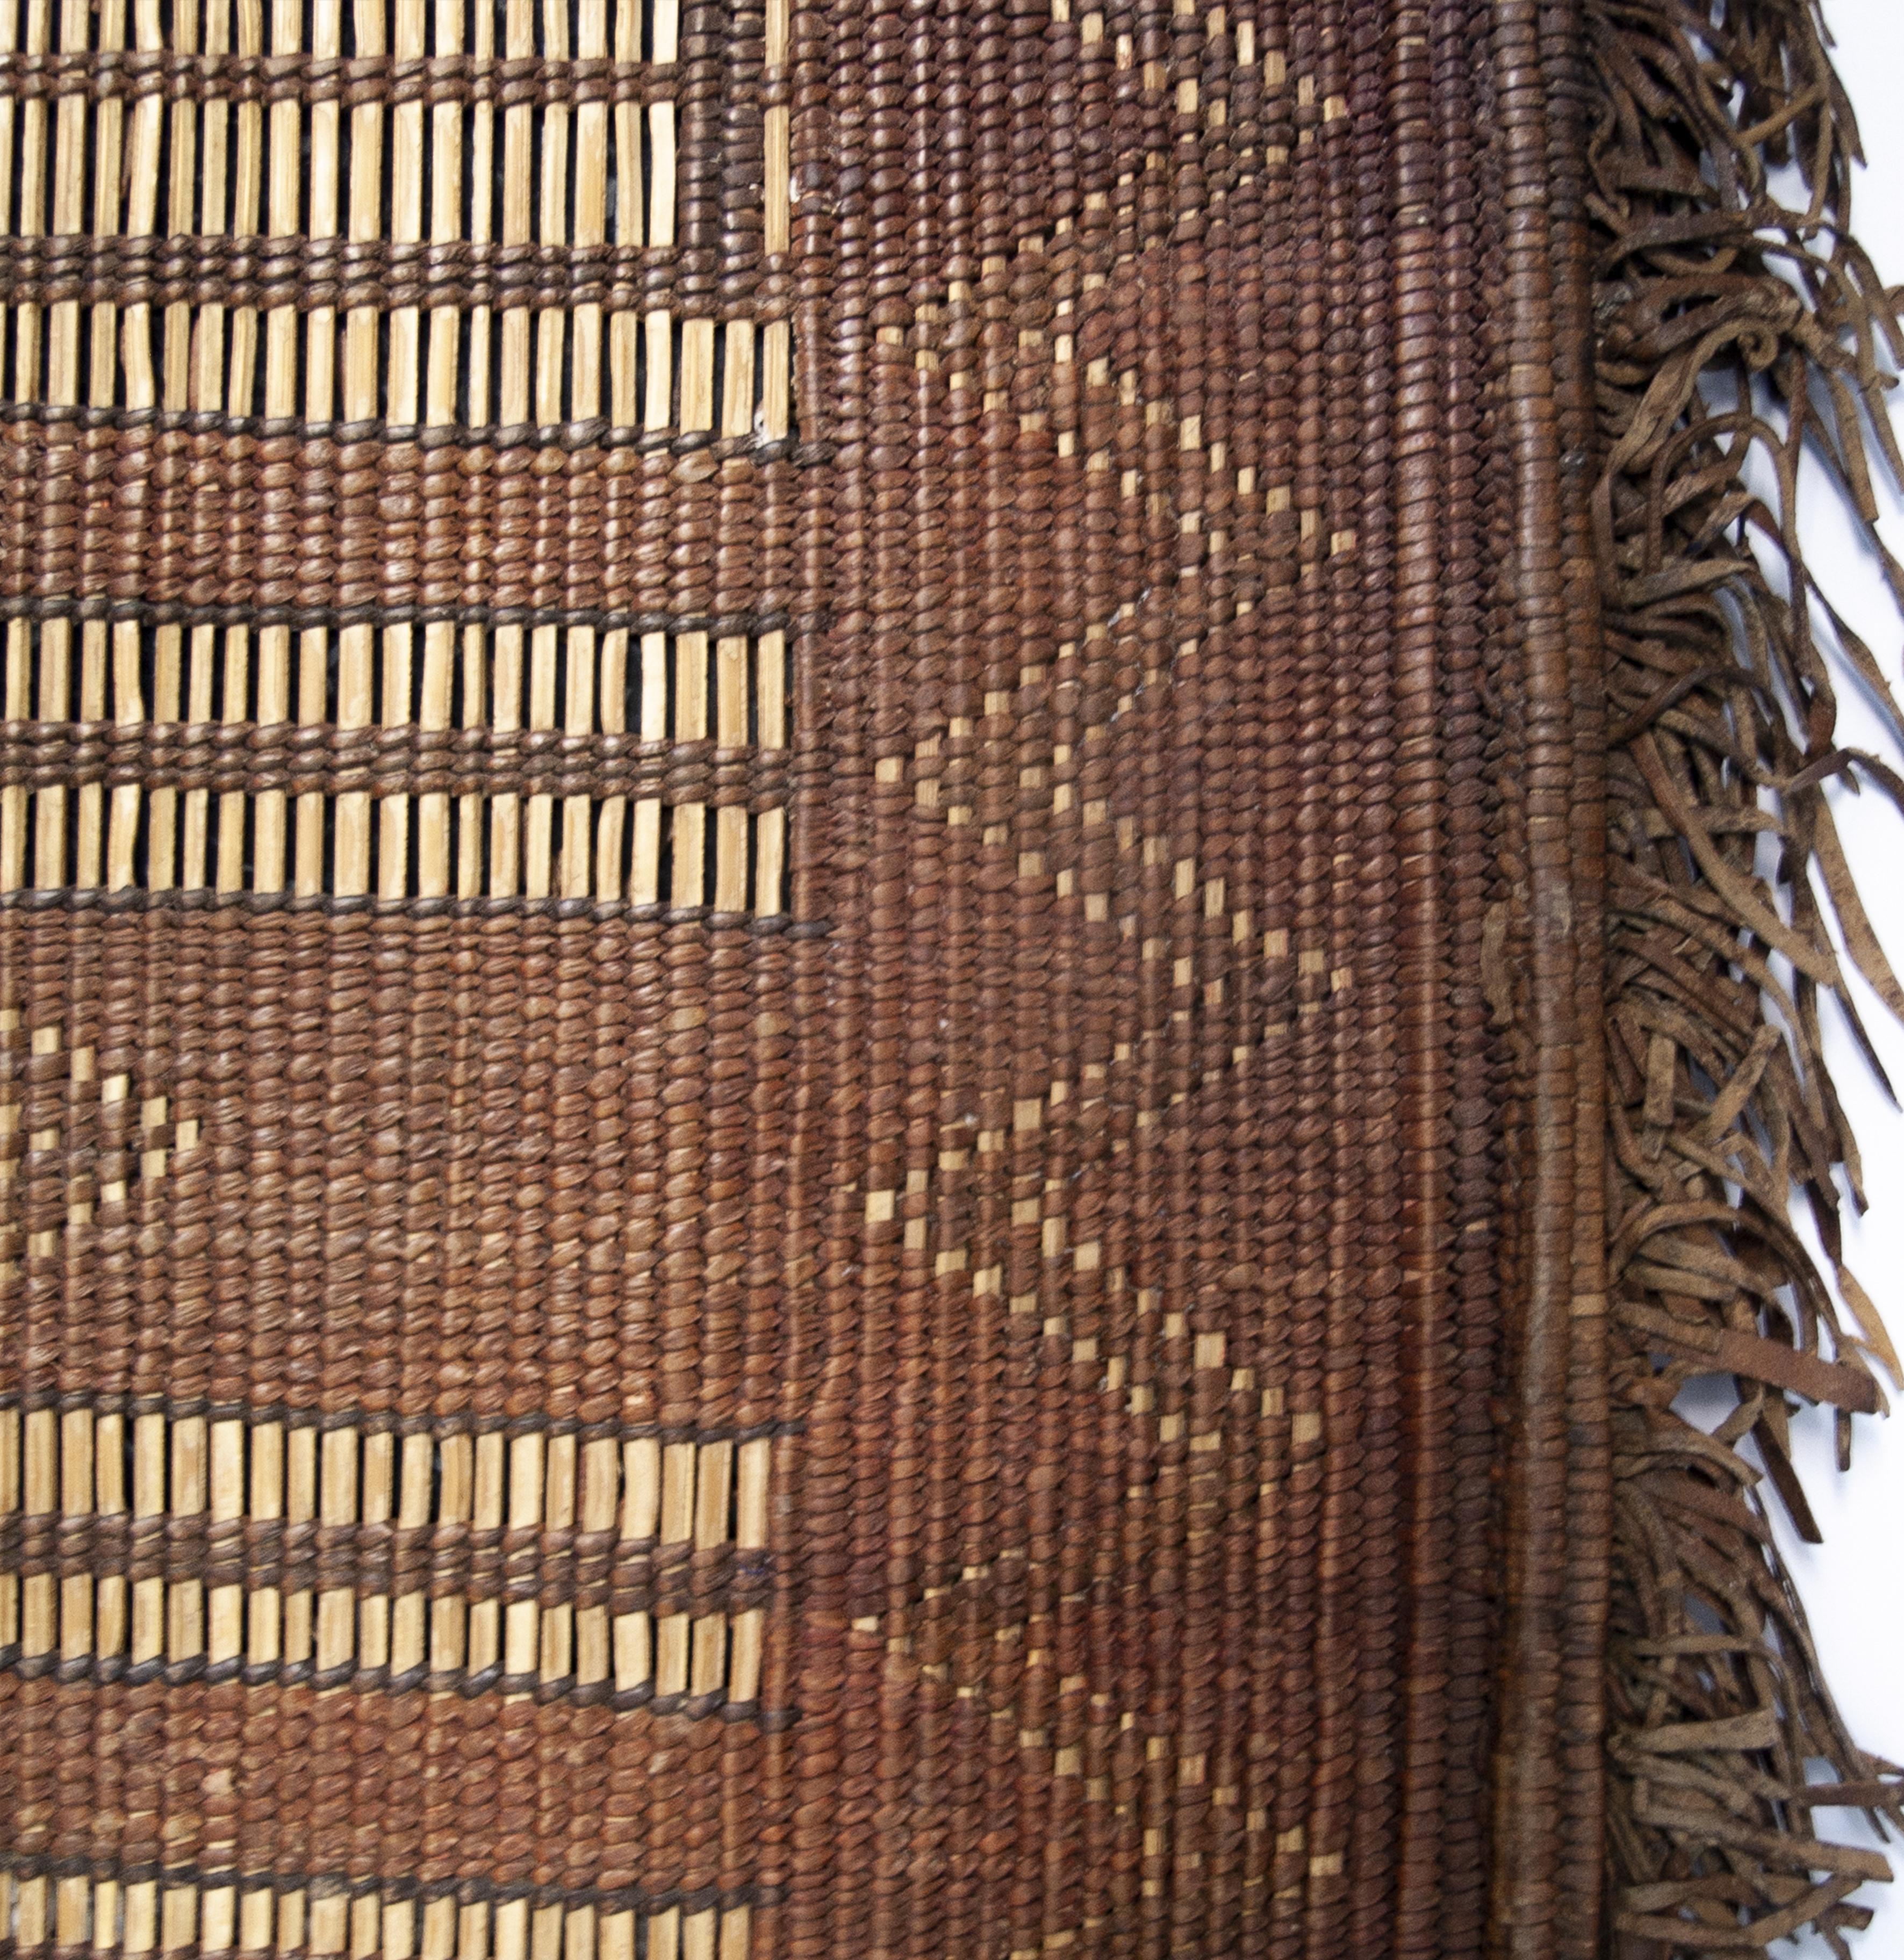 Palmwood Mauritania Mat from Sahara in Leather and Palm Wood, Mid-Century Modern Design For Sale